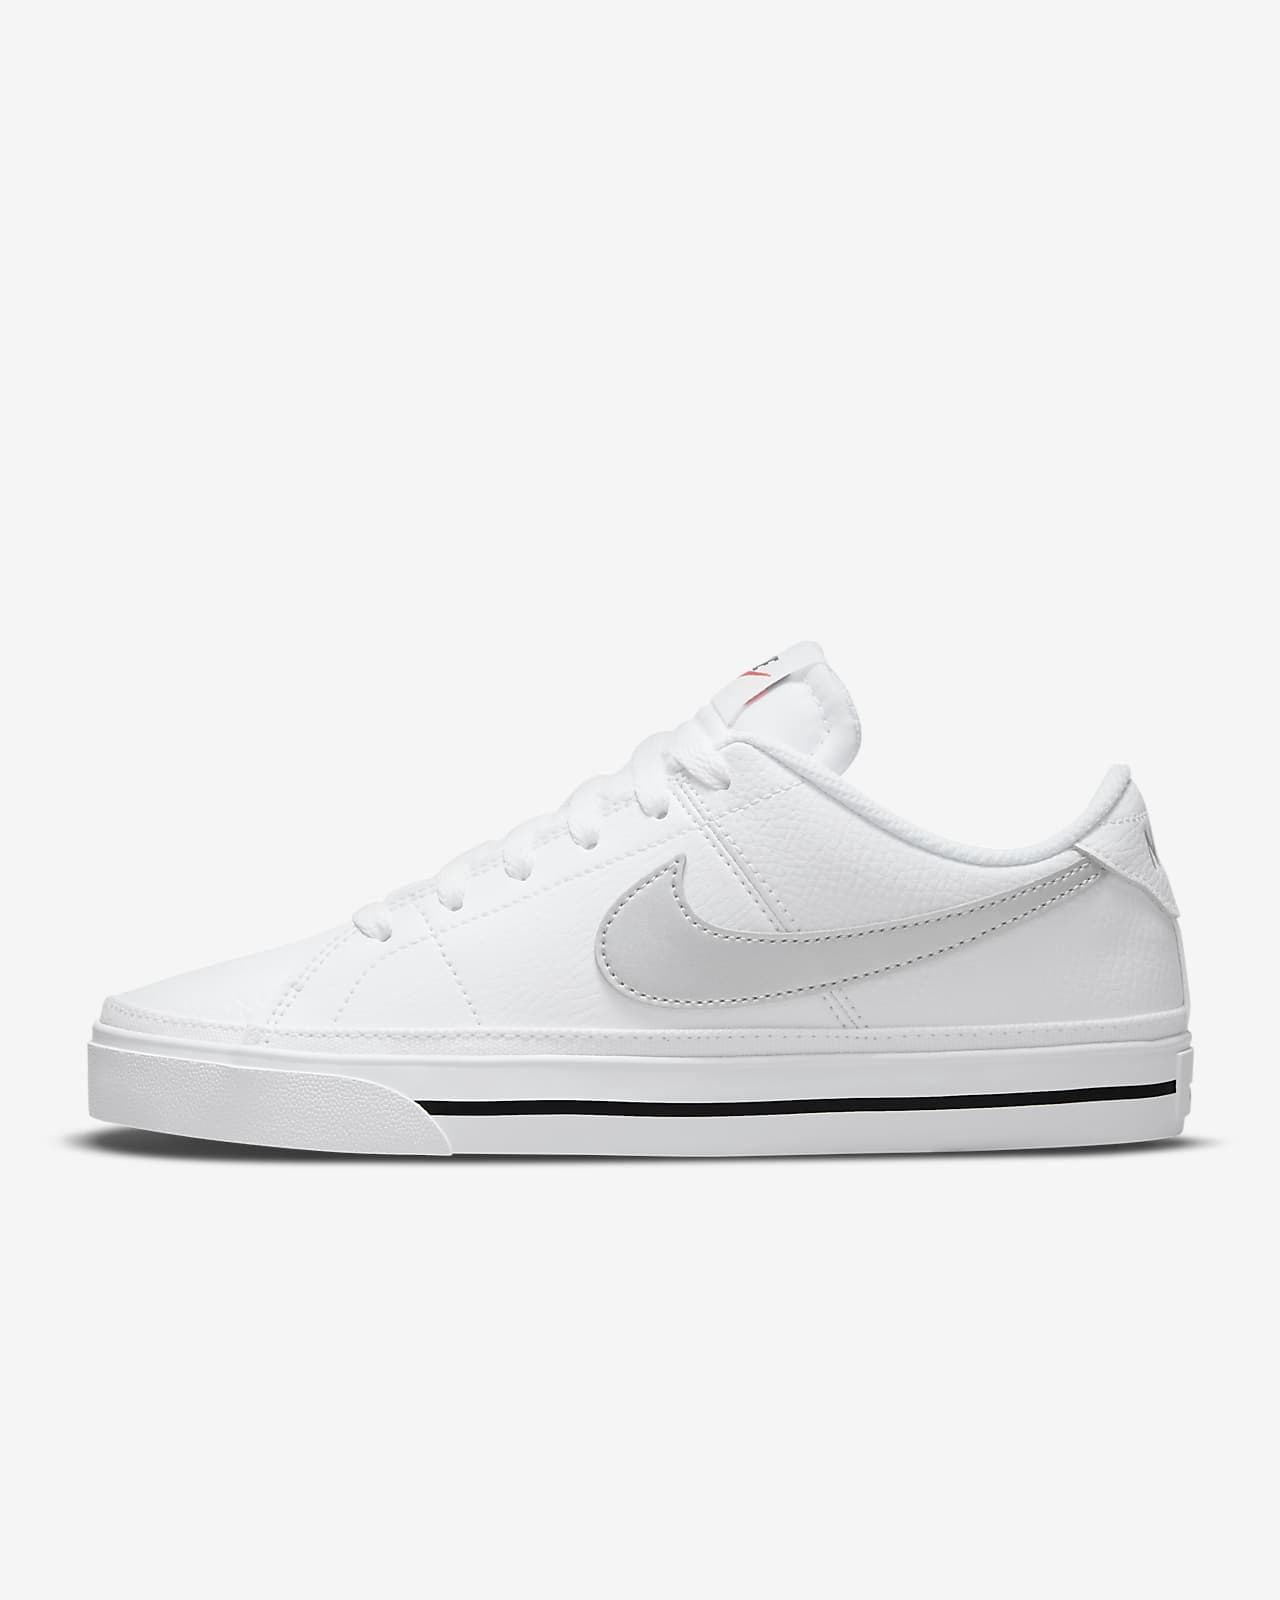 Chaussure Nike Court Legacy pour Femme